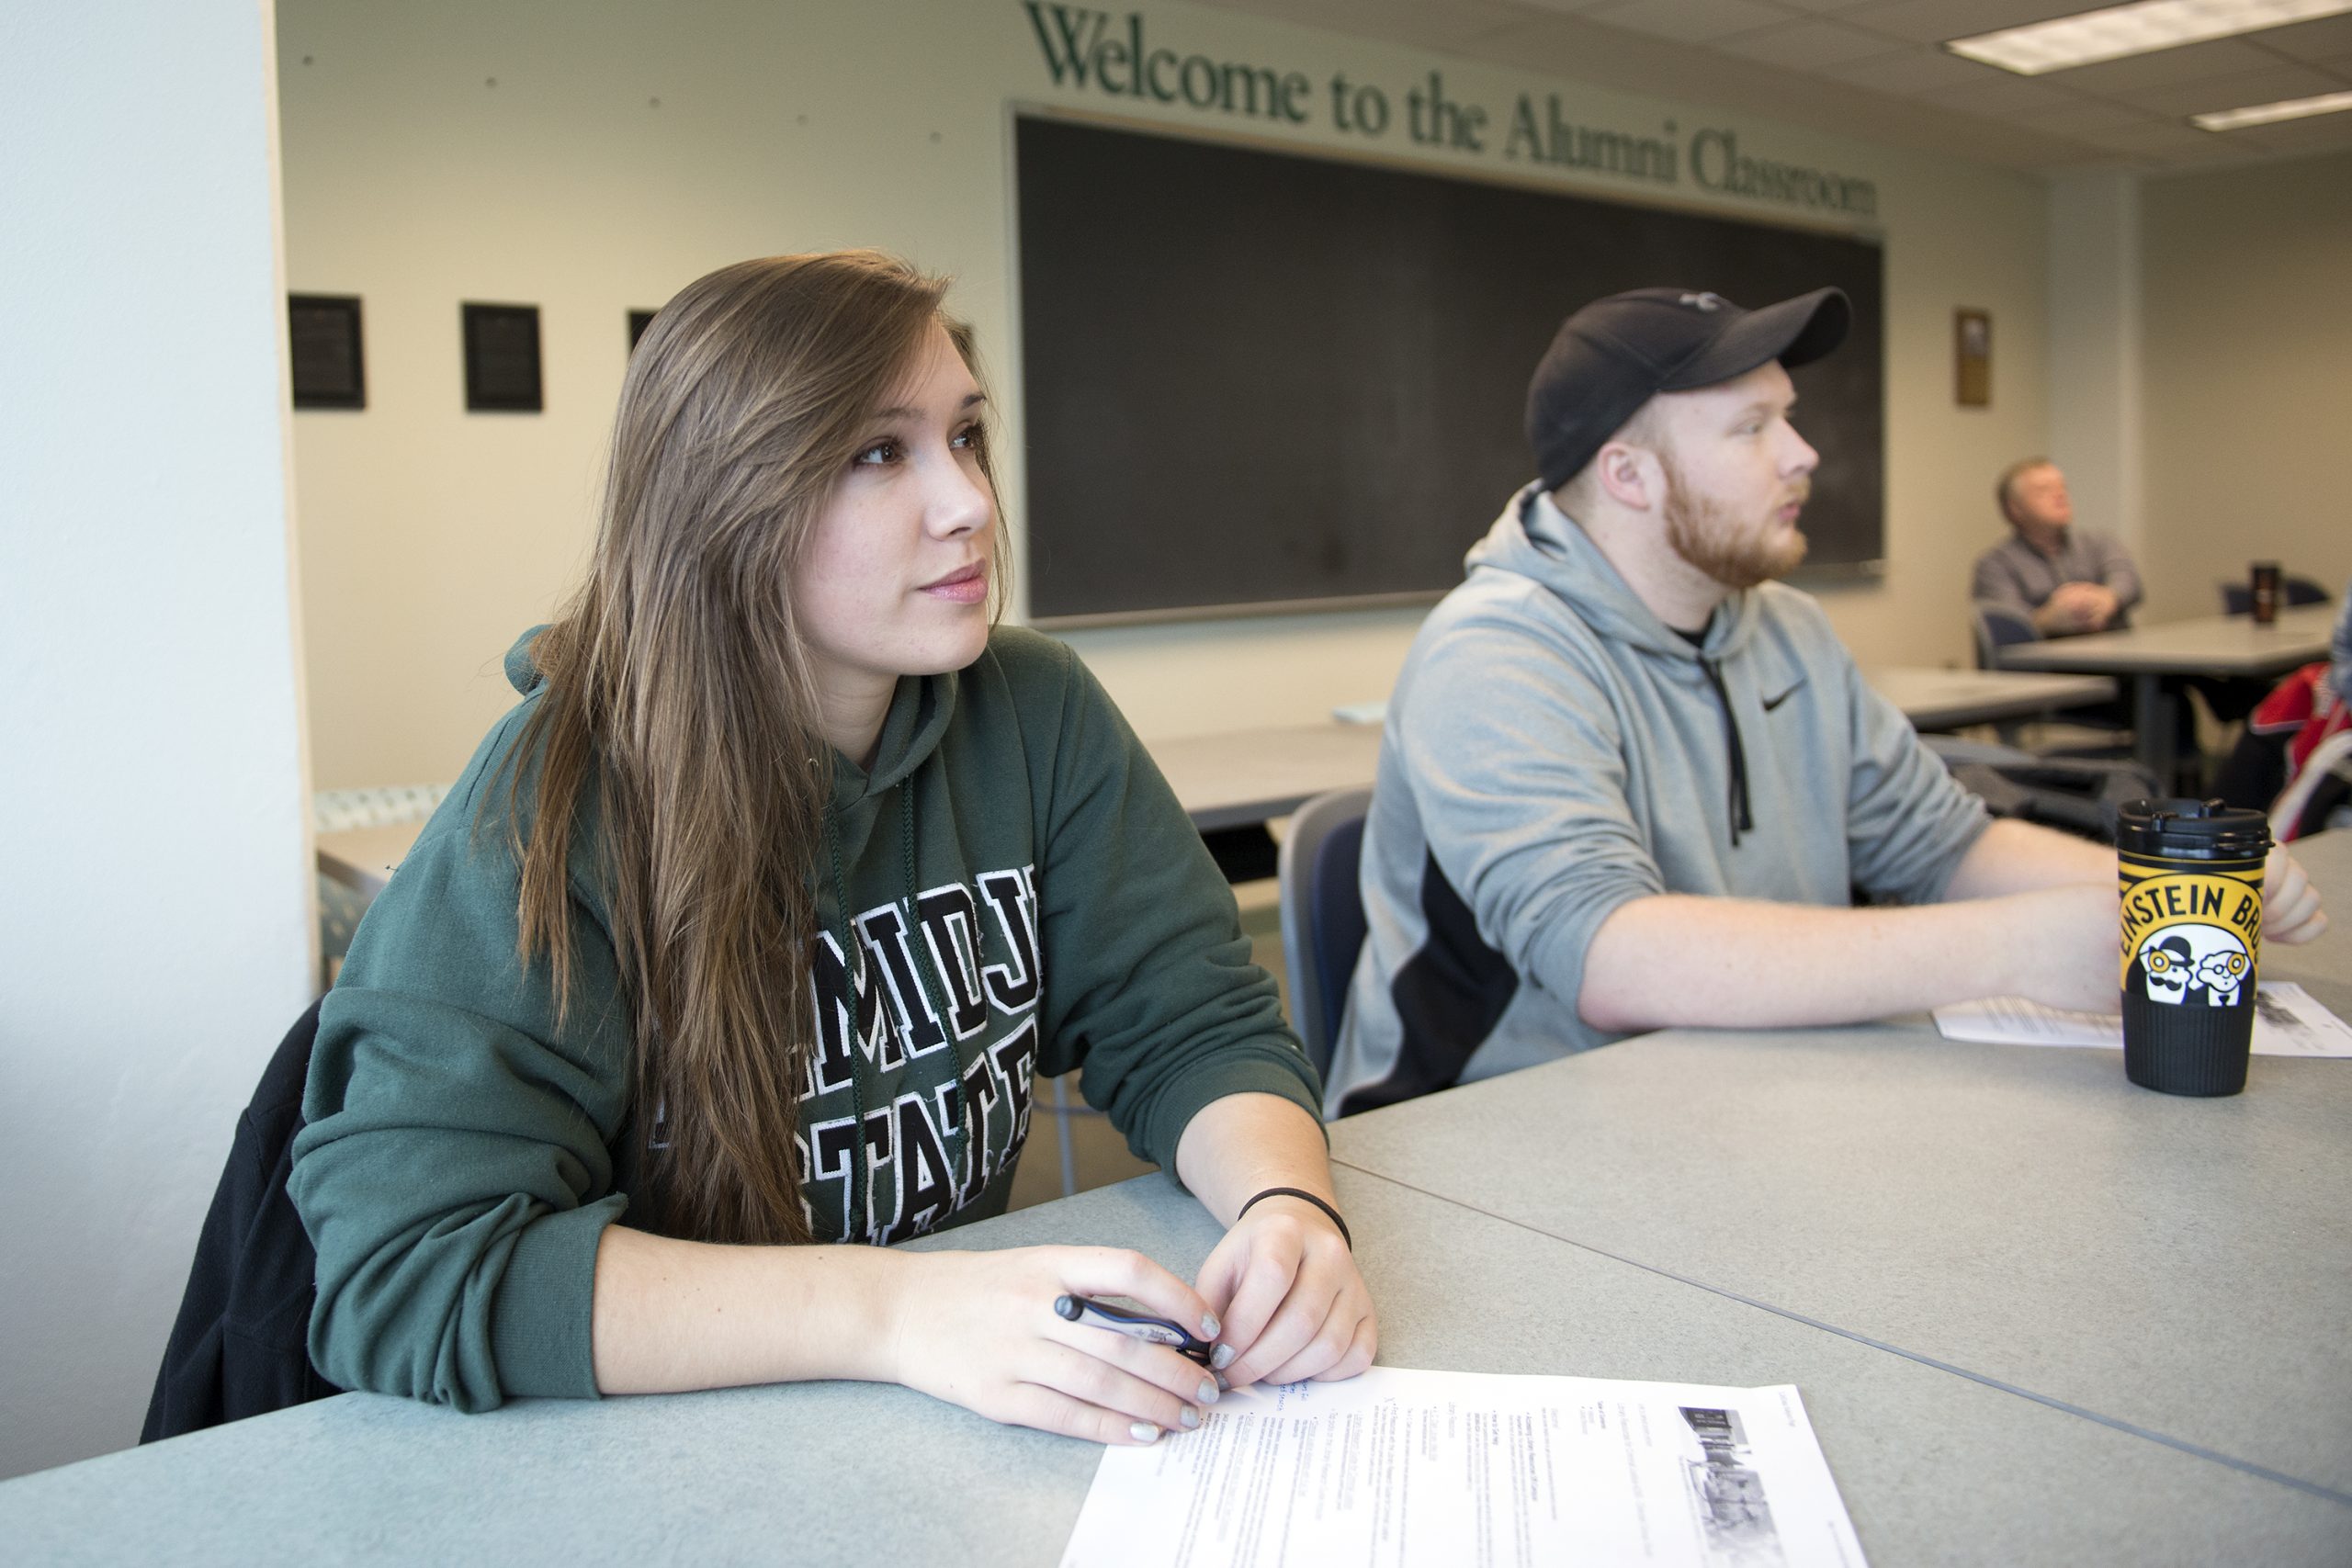 Two students sitting in the Alumni Classroom in the BSU Library, listening to a presentation